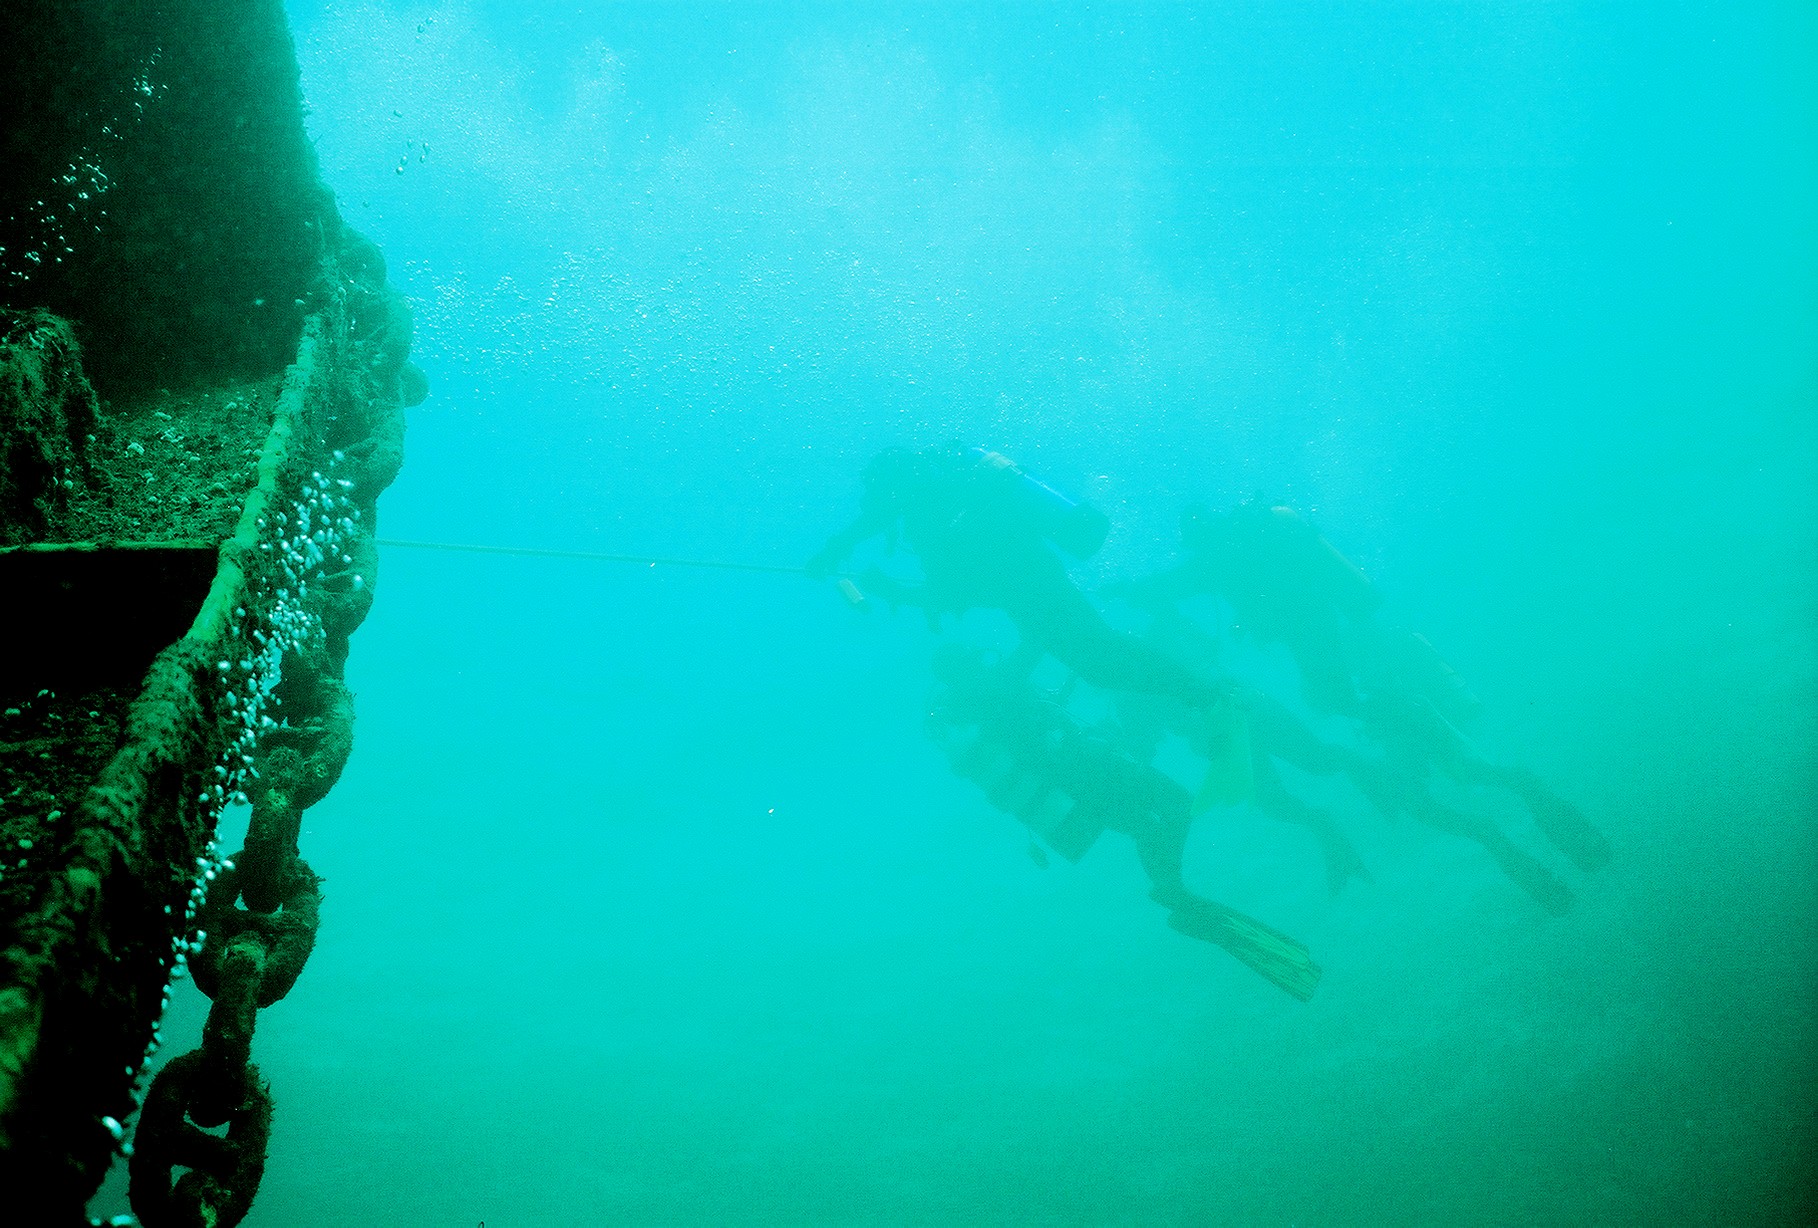 Divers on the Keystorm, St. Lawrence